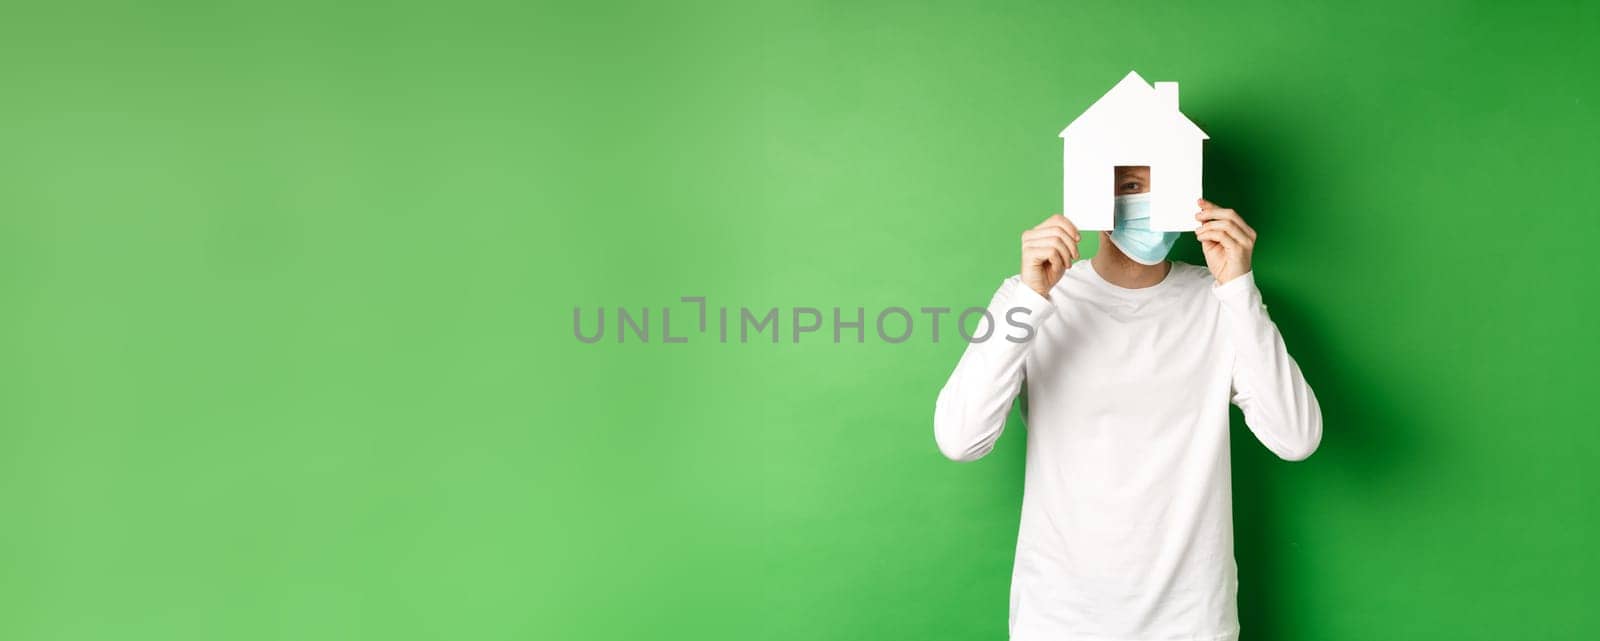 Real estate and covid-19 pandemic concept. Funny young man in face mask and white long-sleeve hiding face behind paper house cutout, peeking at camera, green background.